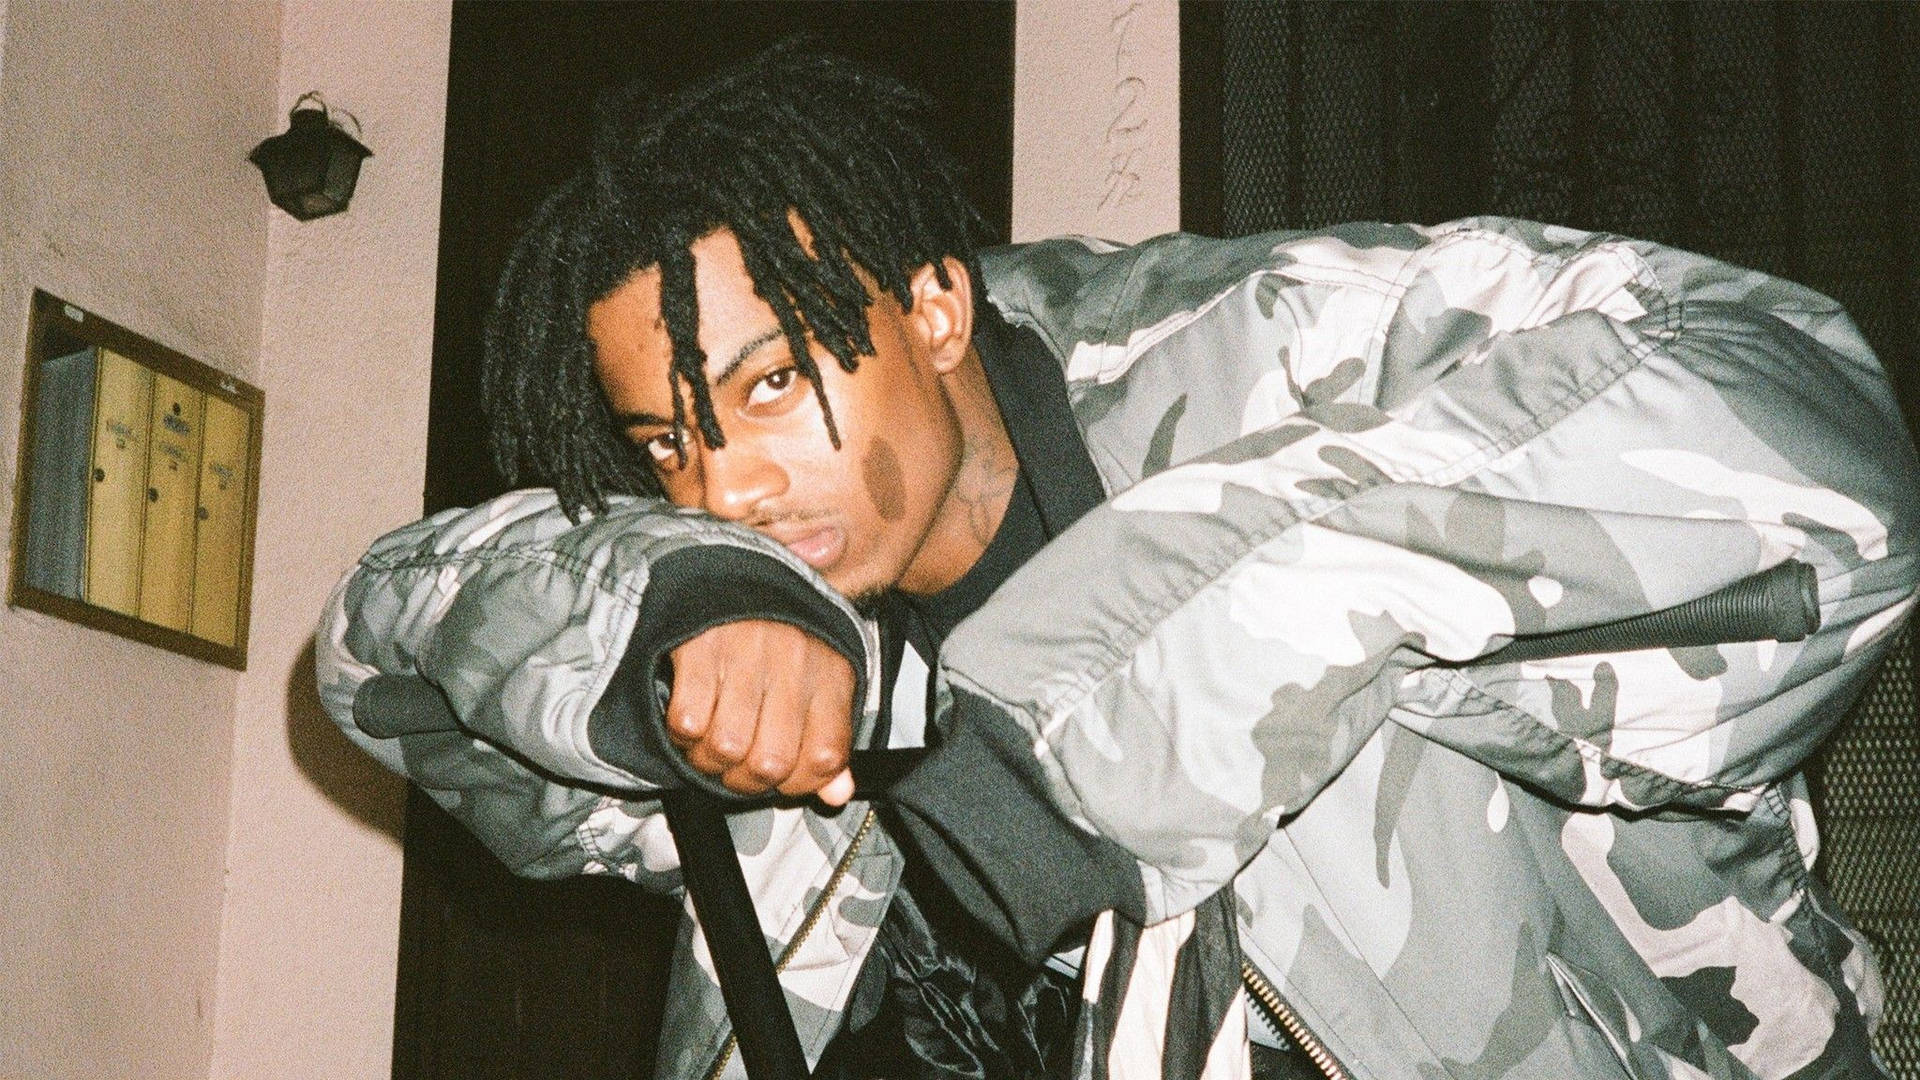 Playboi Carti looking cool and laid back. Wallpaper